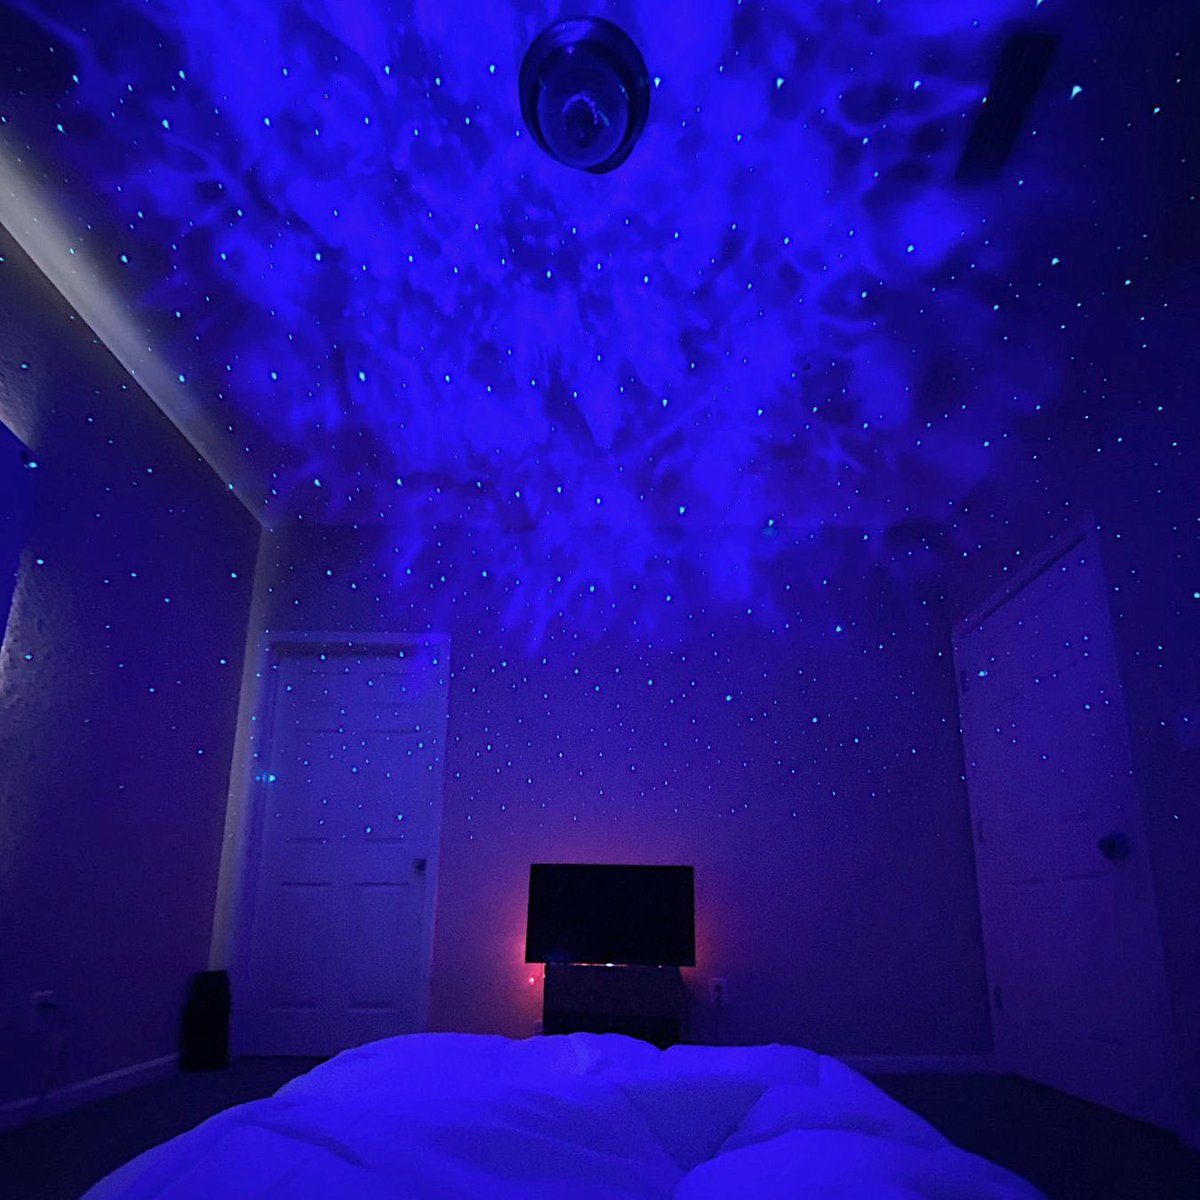 Entertain your guest or yourself with this extravagant galaxy light projector to instantly set the mood. Good vibes only!Check it out!  https://oceangalaxylight.shop/products/light 